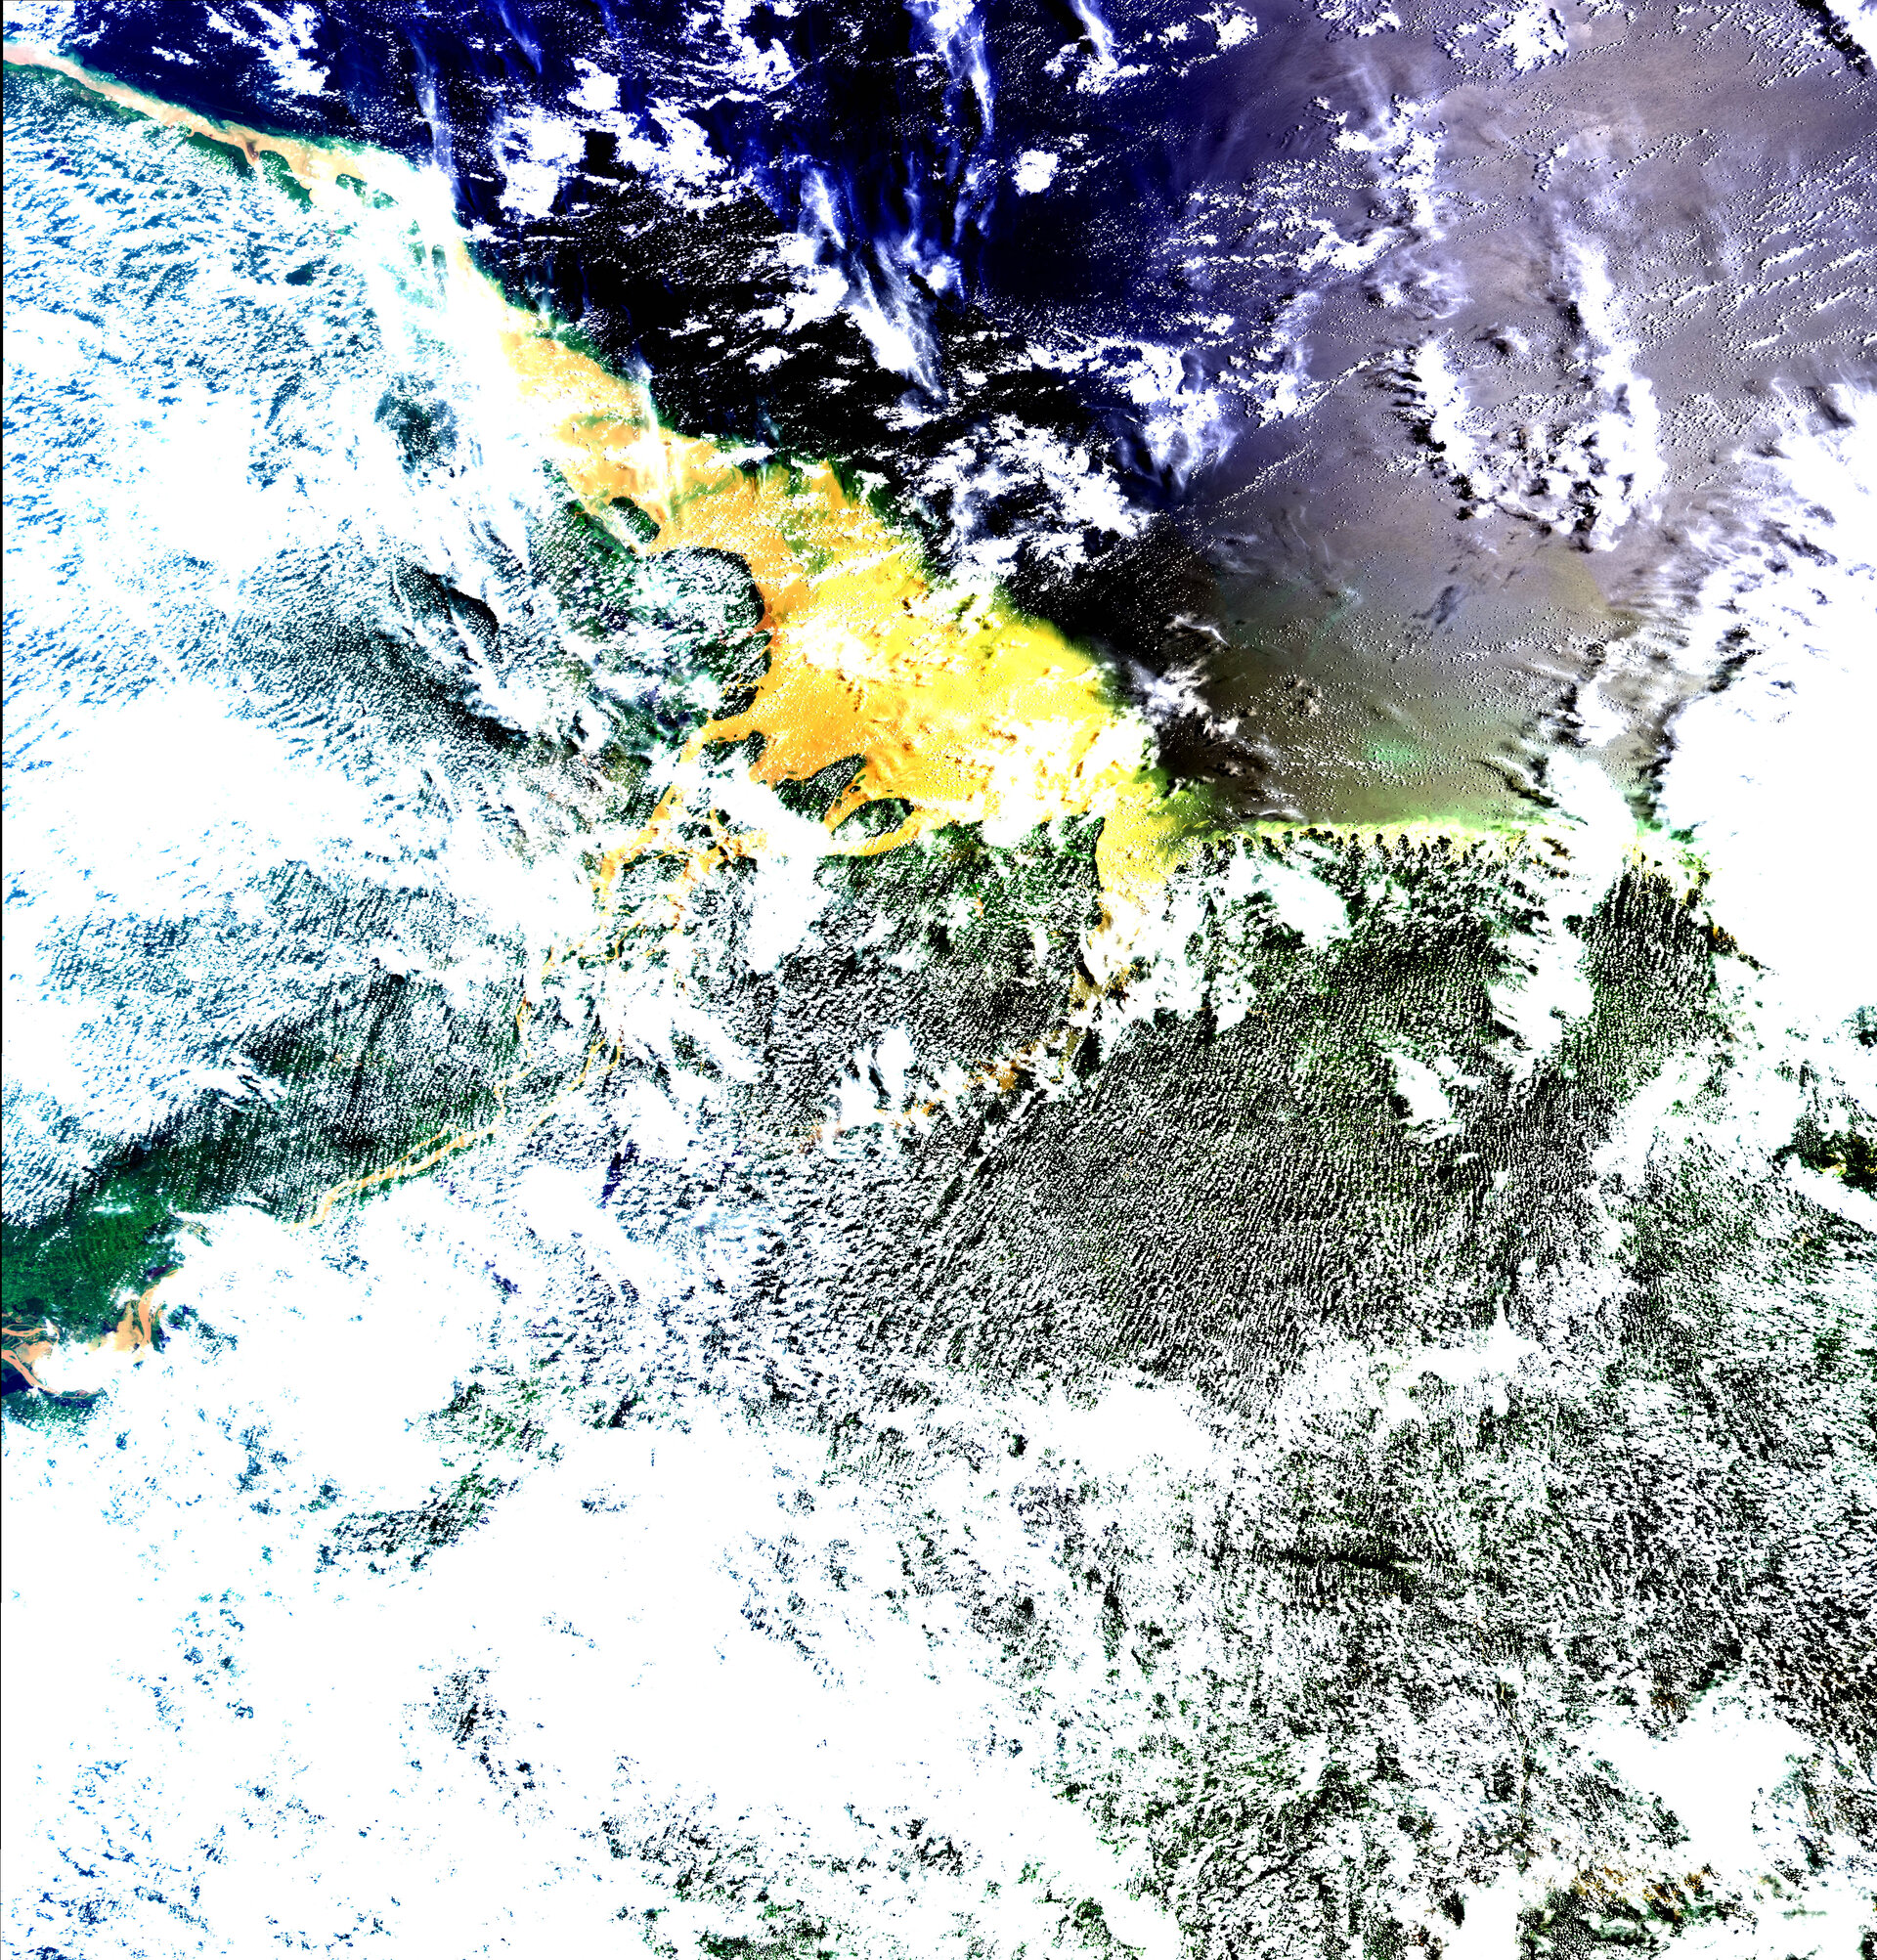 Meris image of the mouth of the Amazon,  25 March 2002